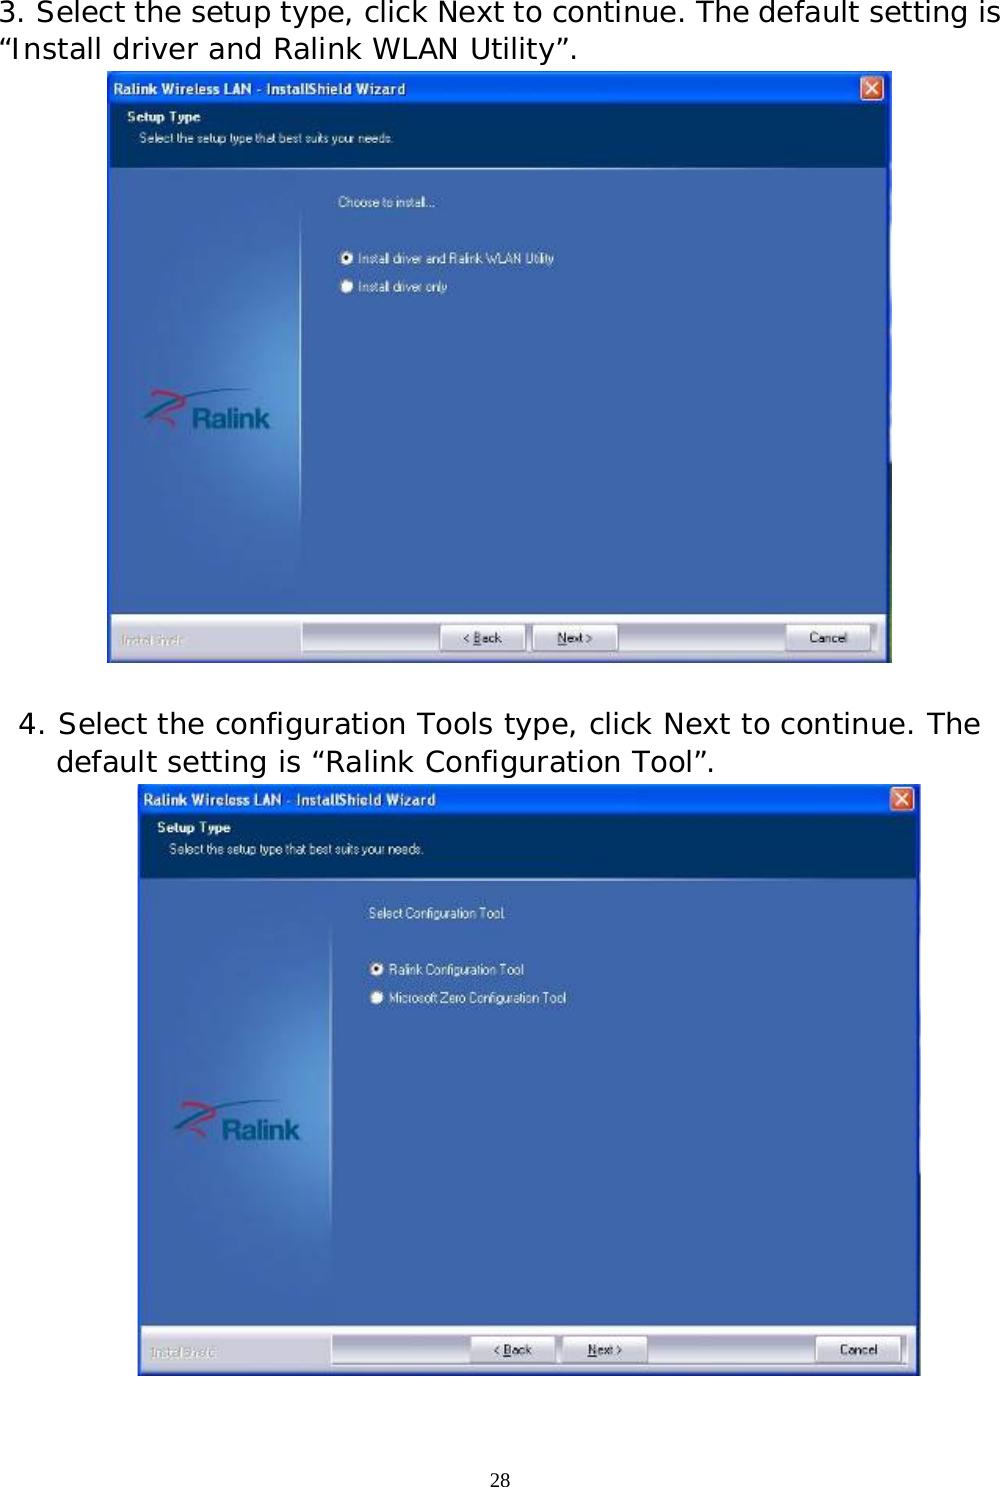  28 3. Select the setup type, click Next to continue. The default setting is “Install driver and Ralink WLAN Utility”.   4. Select the configuration Tools type, click Next to continue. The  default setting is “Ralink Configuration Tool”.   